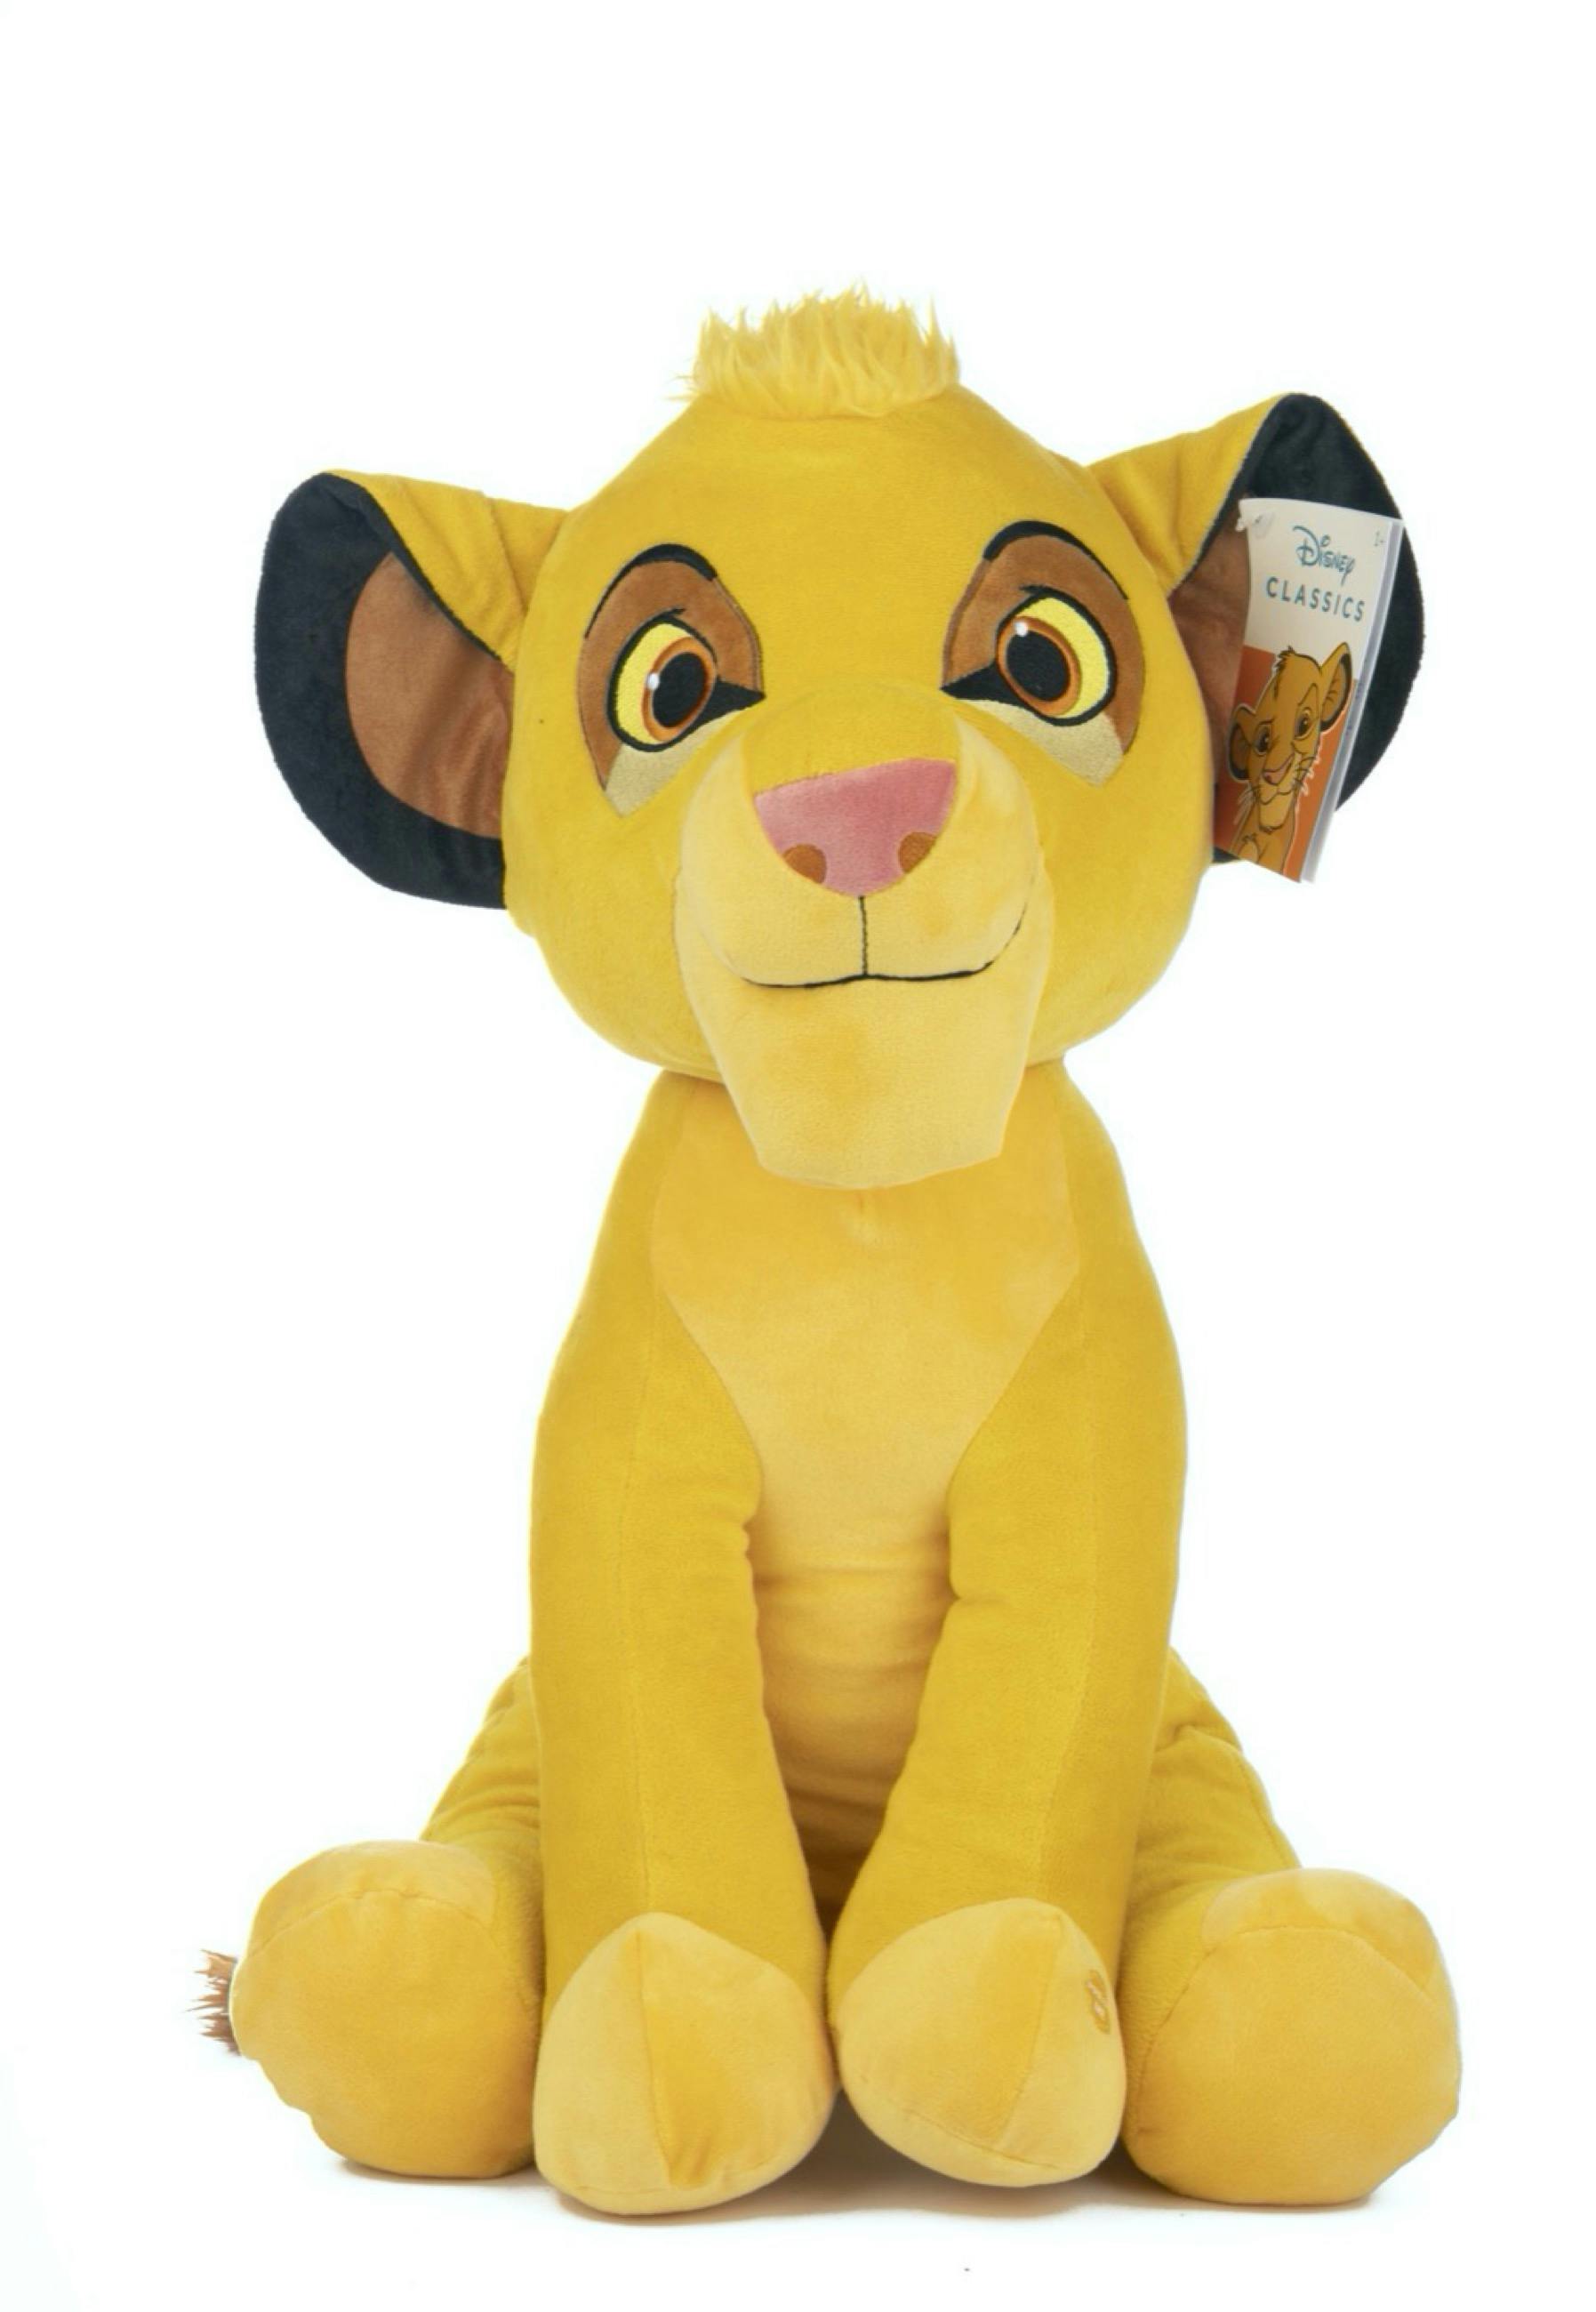 Product - Simba with Sound